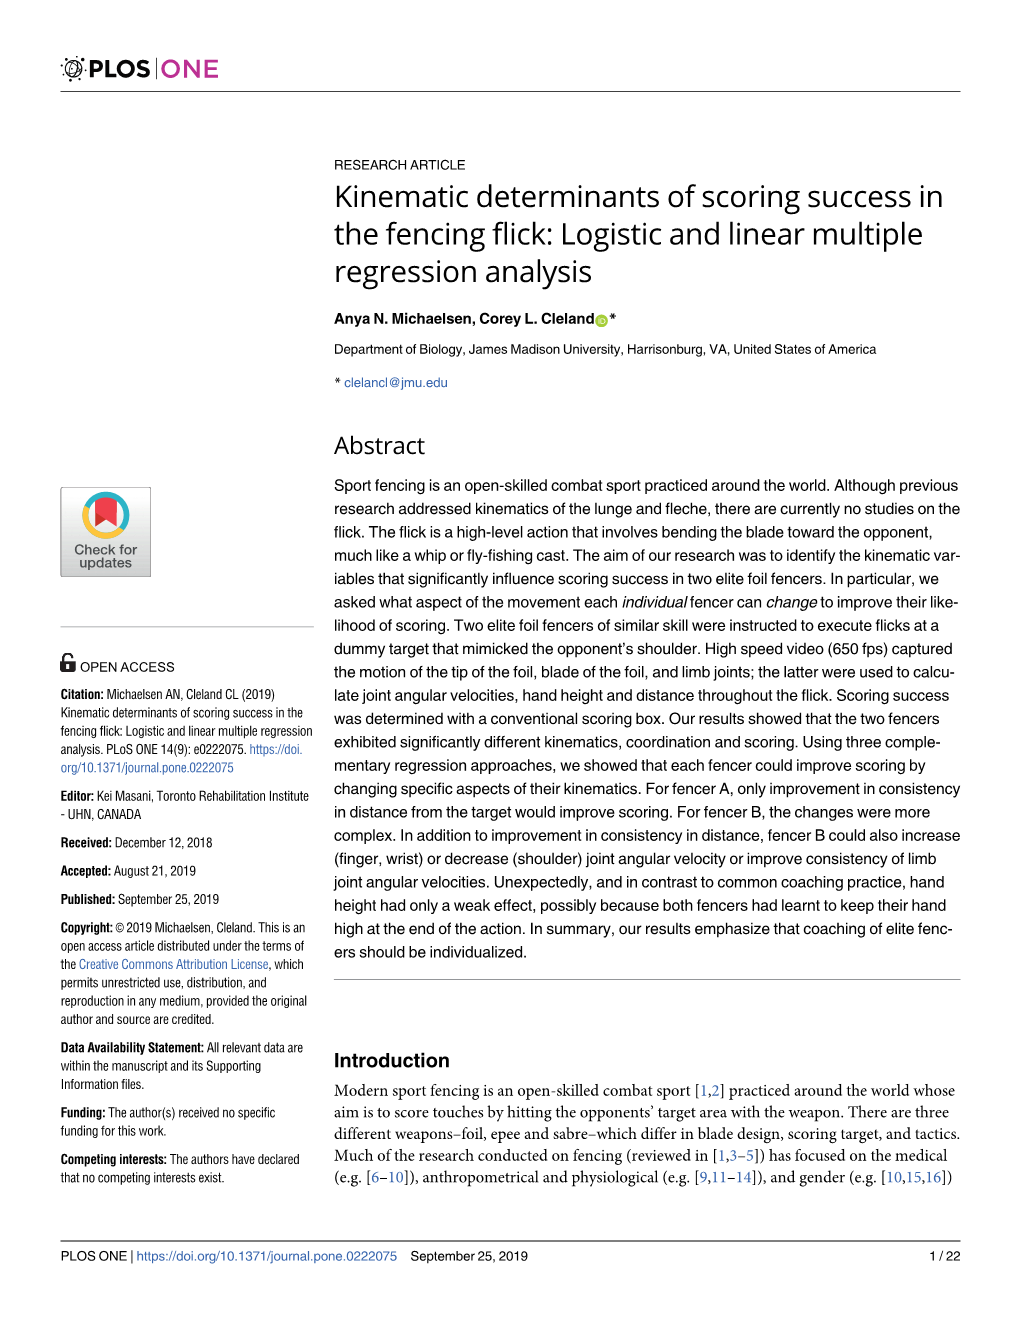 Kinematic Determinants of Scoring Success in the Fencing Flick: Logistic and Linear Multiple Regression Analysis